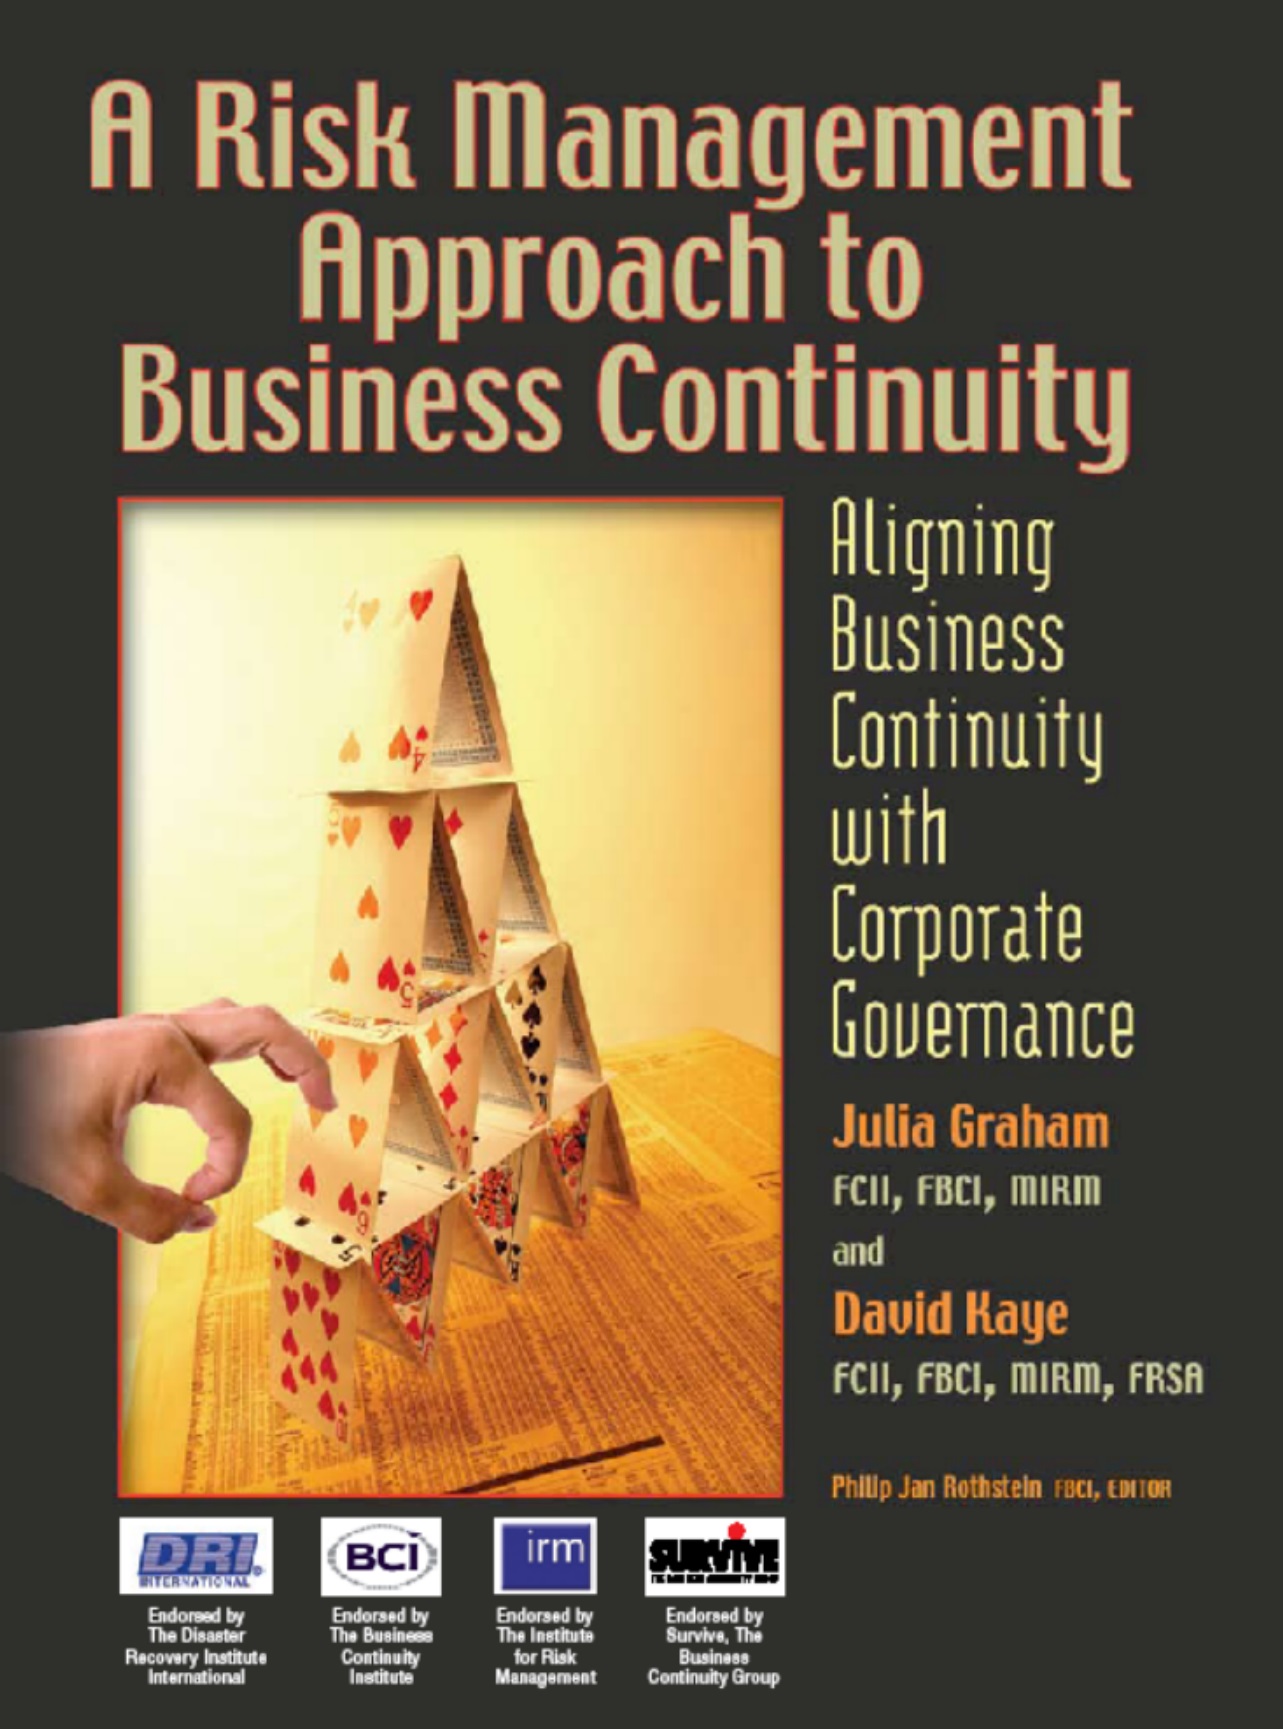 a-risk-management-approach-to-business-continuity-by-julia-graham-rothstein-publishing